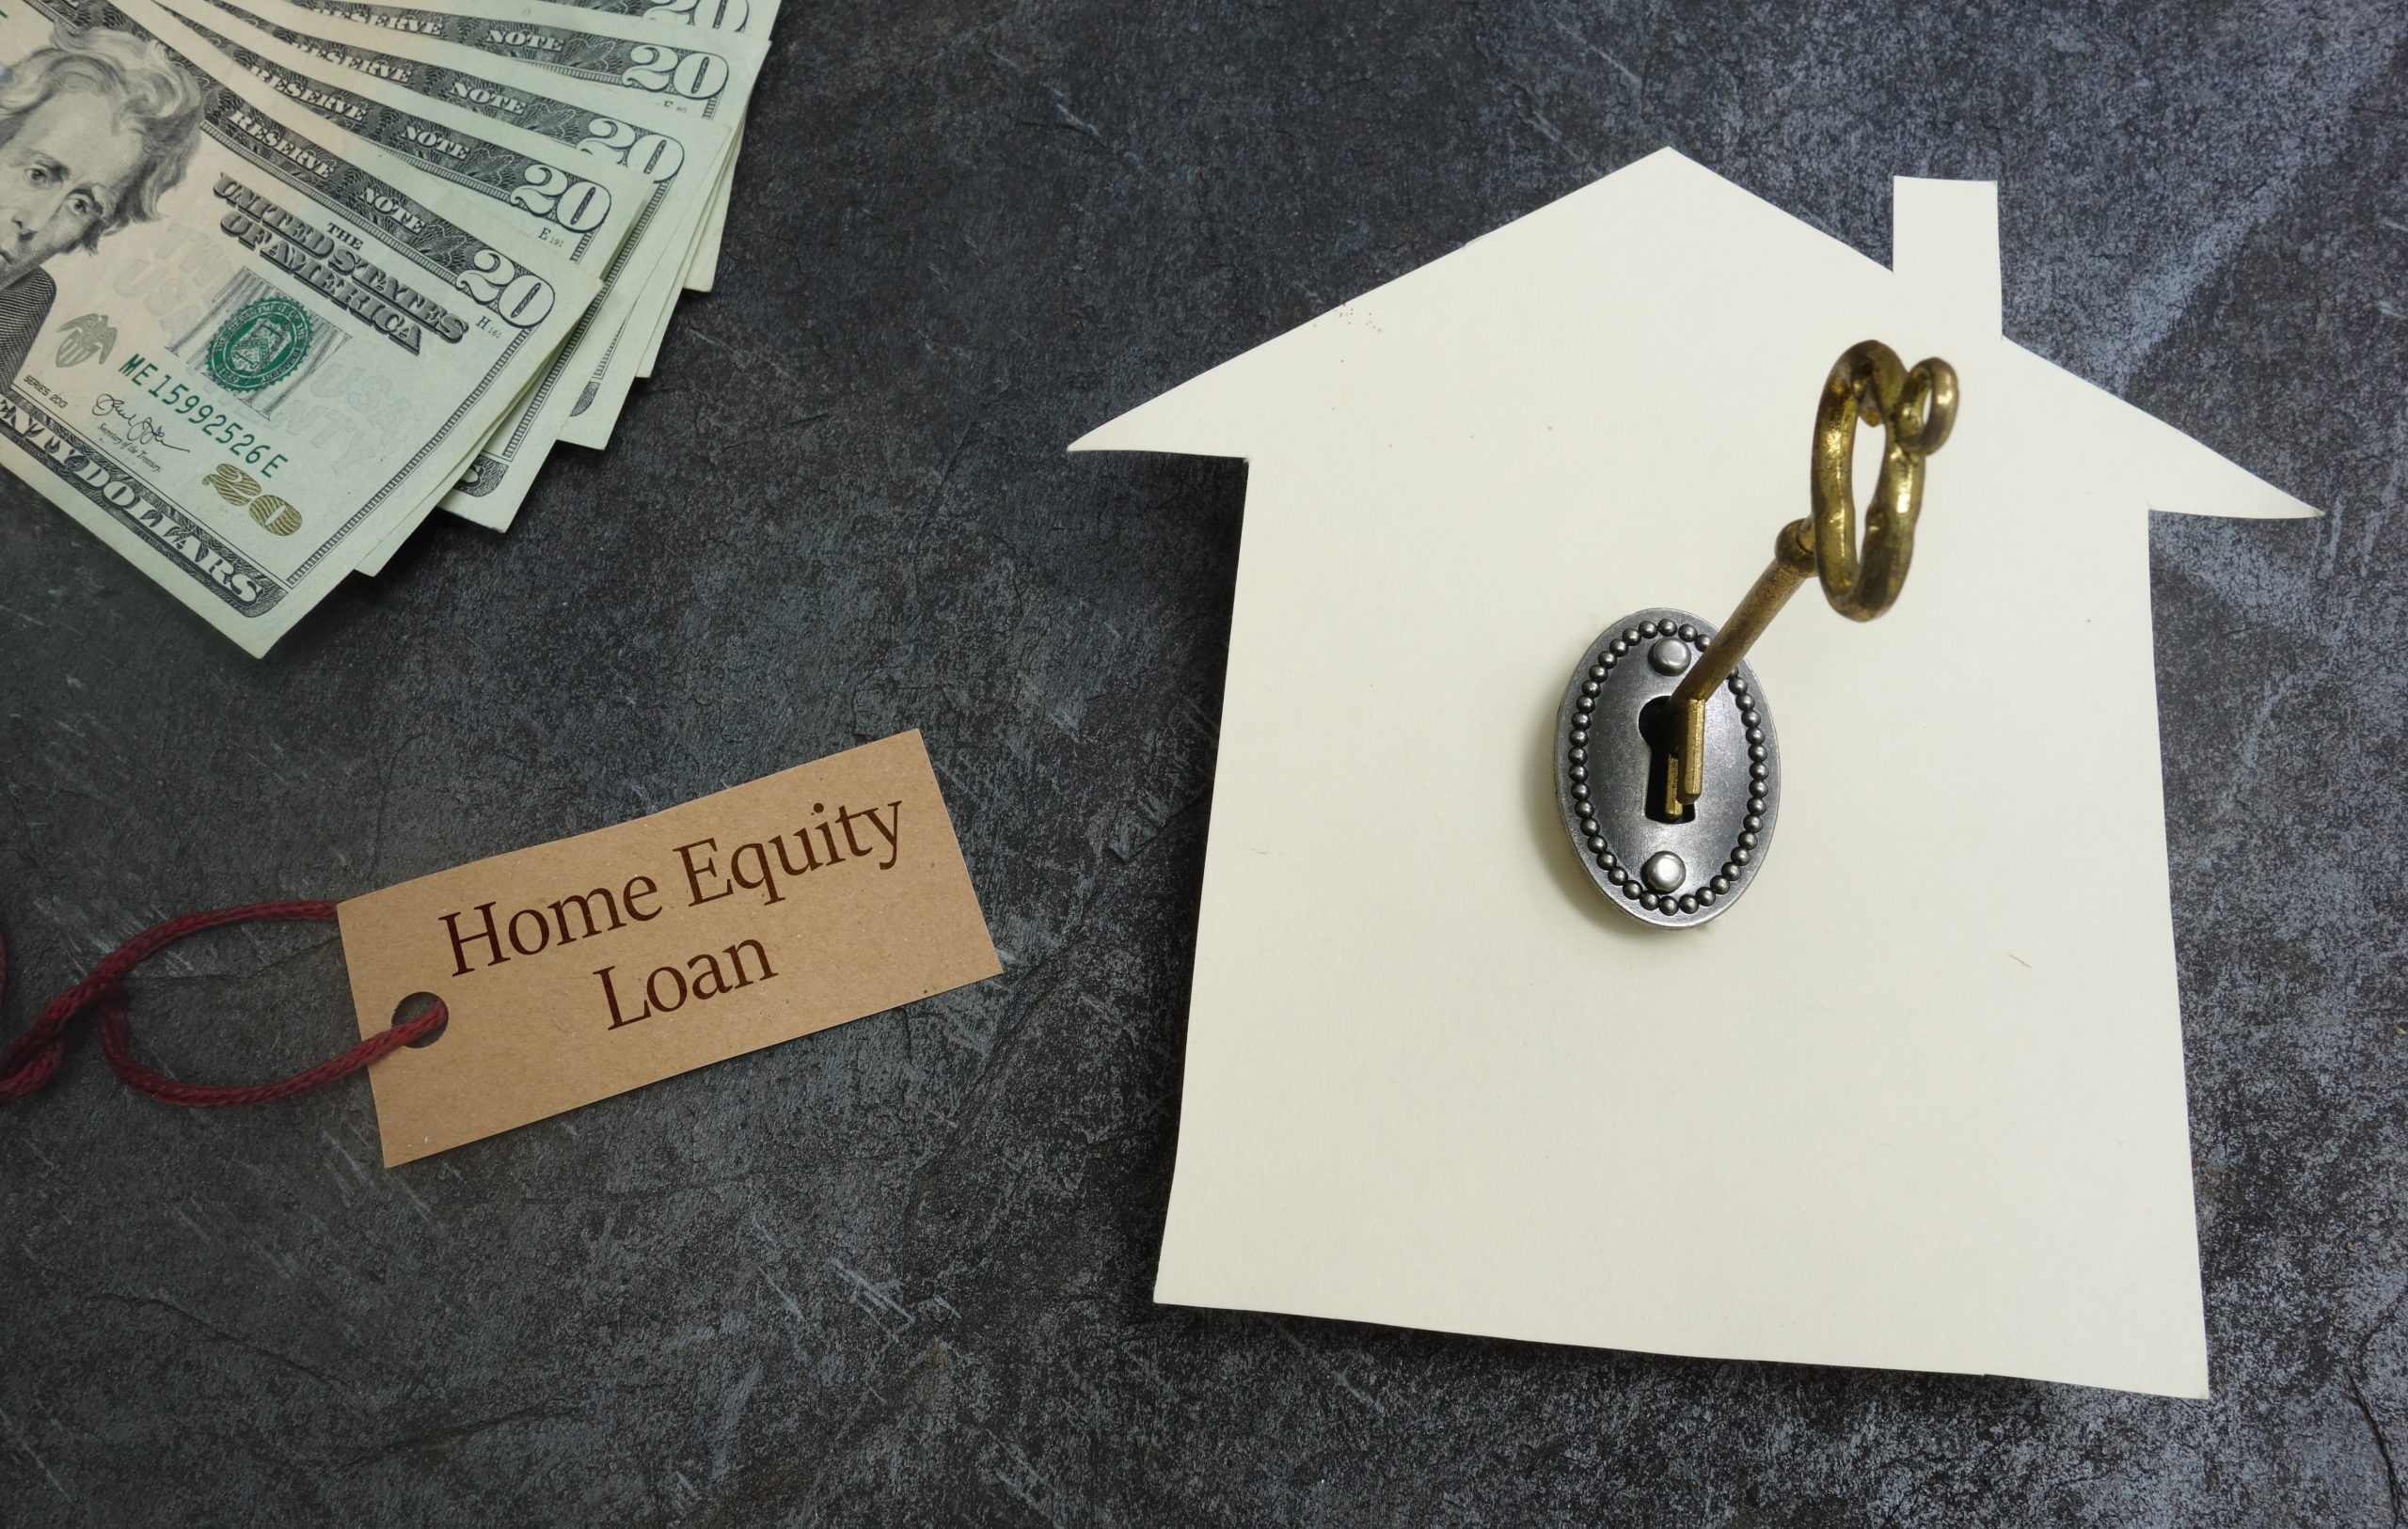 Second Mortgage - Home Equity Loan